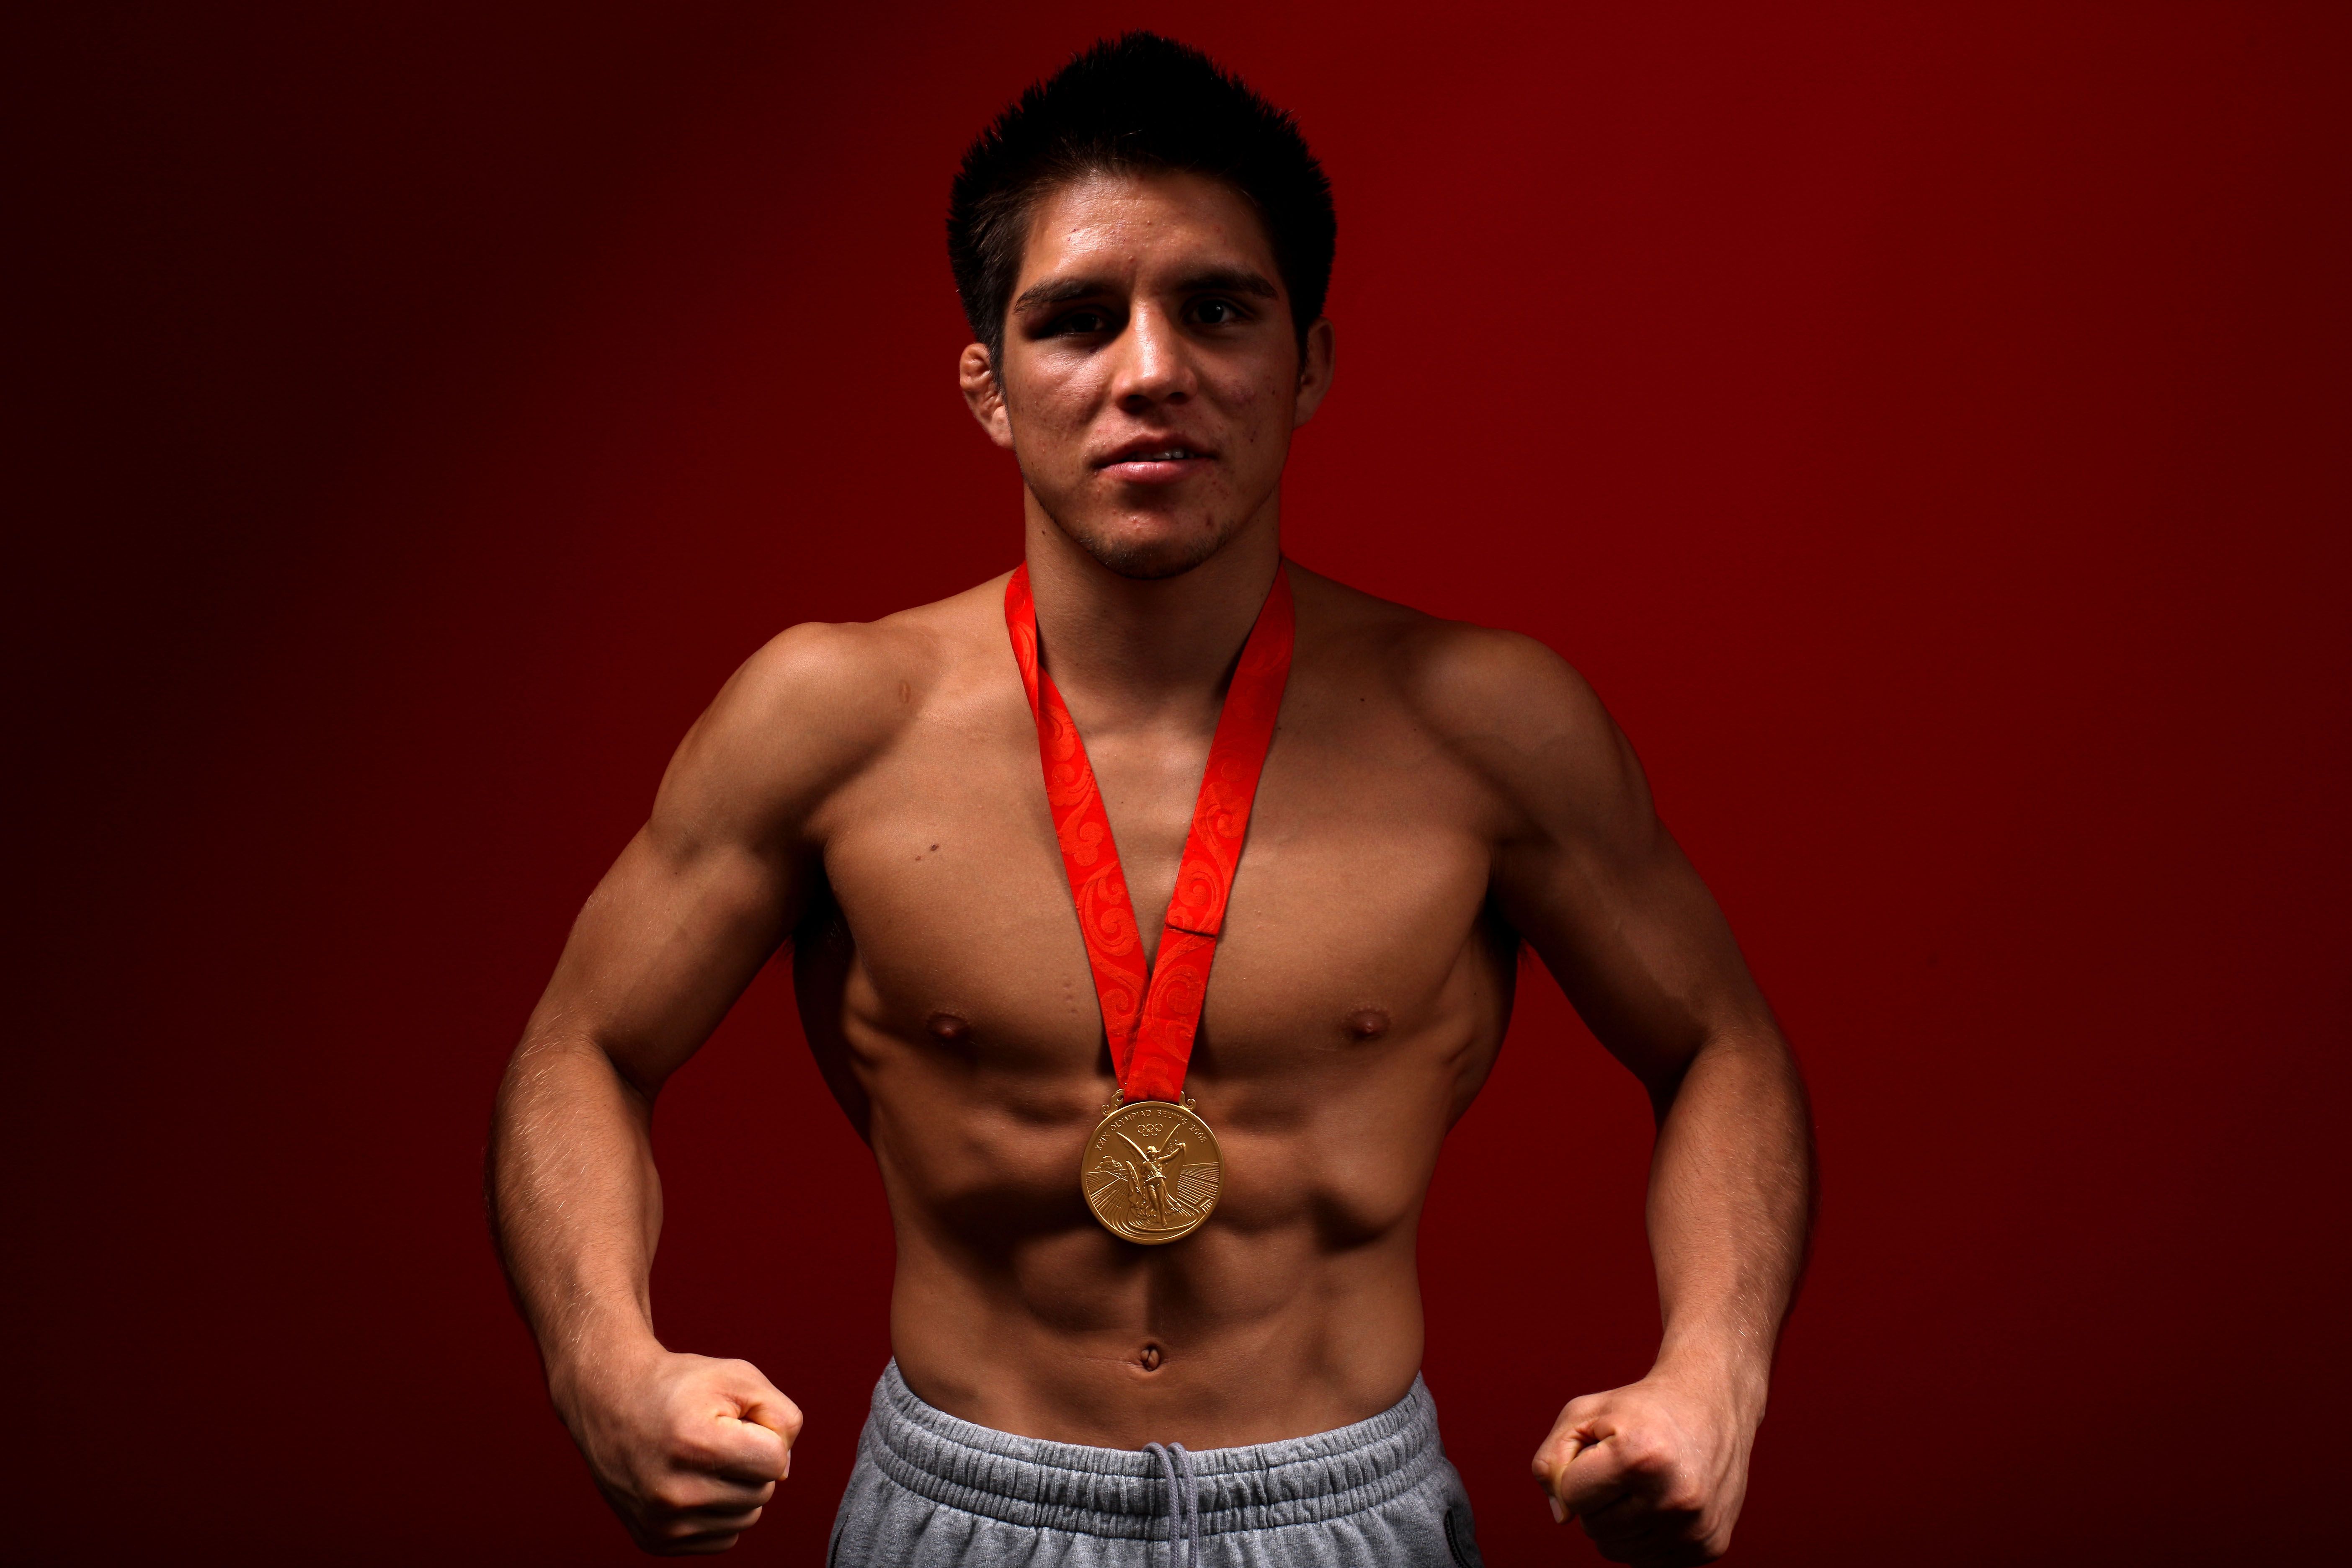 Henry Cejudo has made a pretty incredible claim ahead of UFC 197